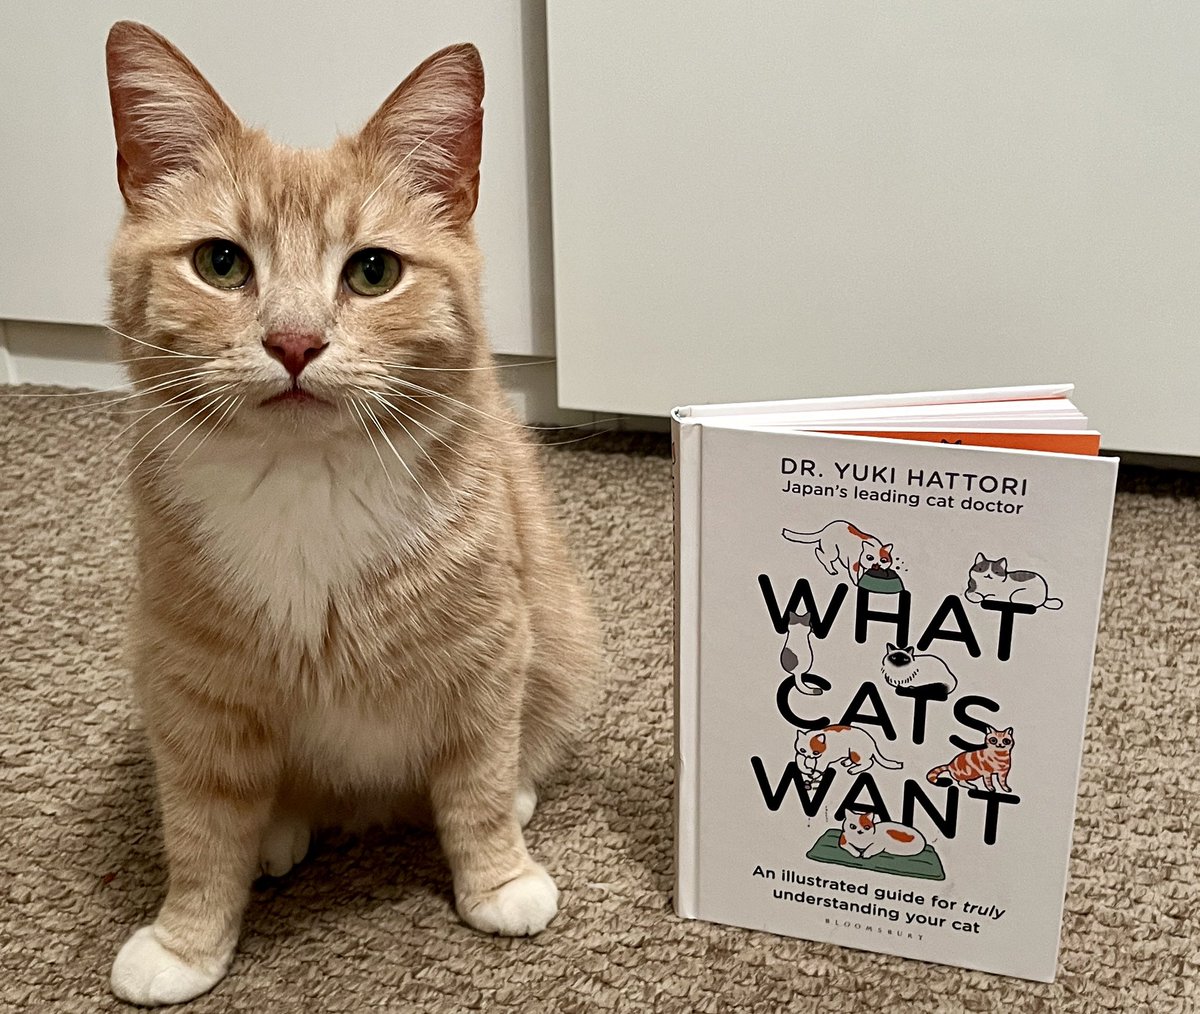 Everyone in the world should read this book😹😹😹😹🧡😻🧡 #catsoftwitter #catsontwitter #adoptdontshop #CatsLover #catsprotection #catsprotectionawards #voteeric #rescuecat  #NationalCatAwards